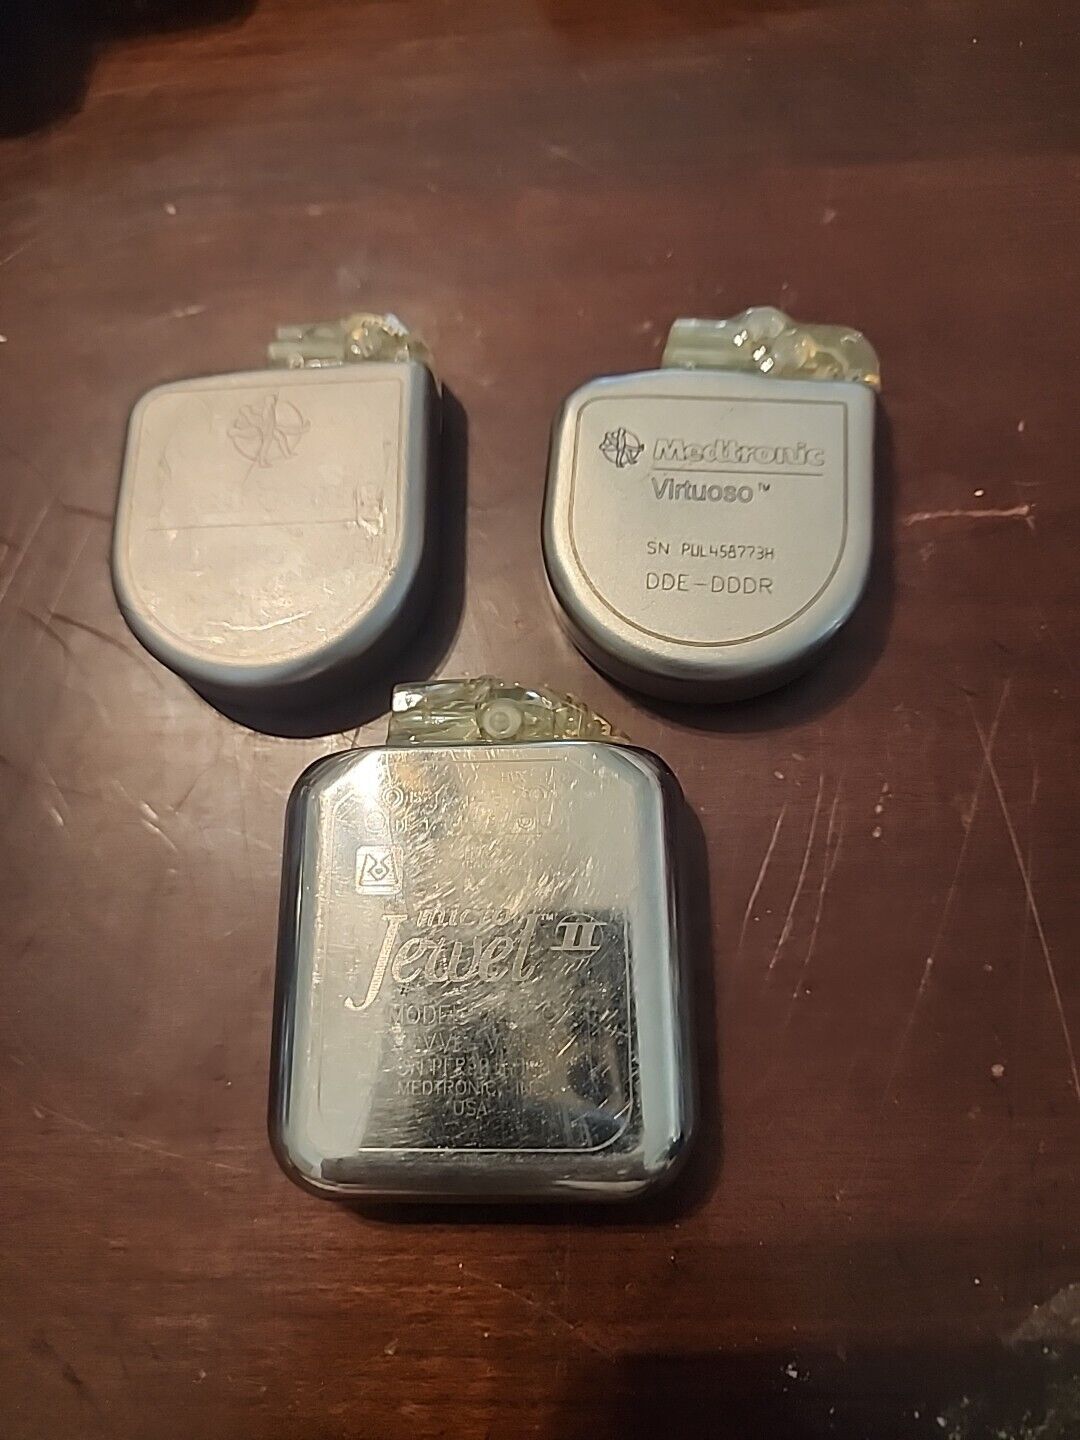 3x Vintage Heart Pacemakers Medical Cardiac Devices Lot Pace Maker FOR DISPLAY